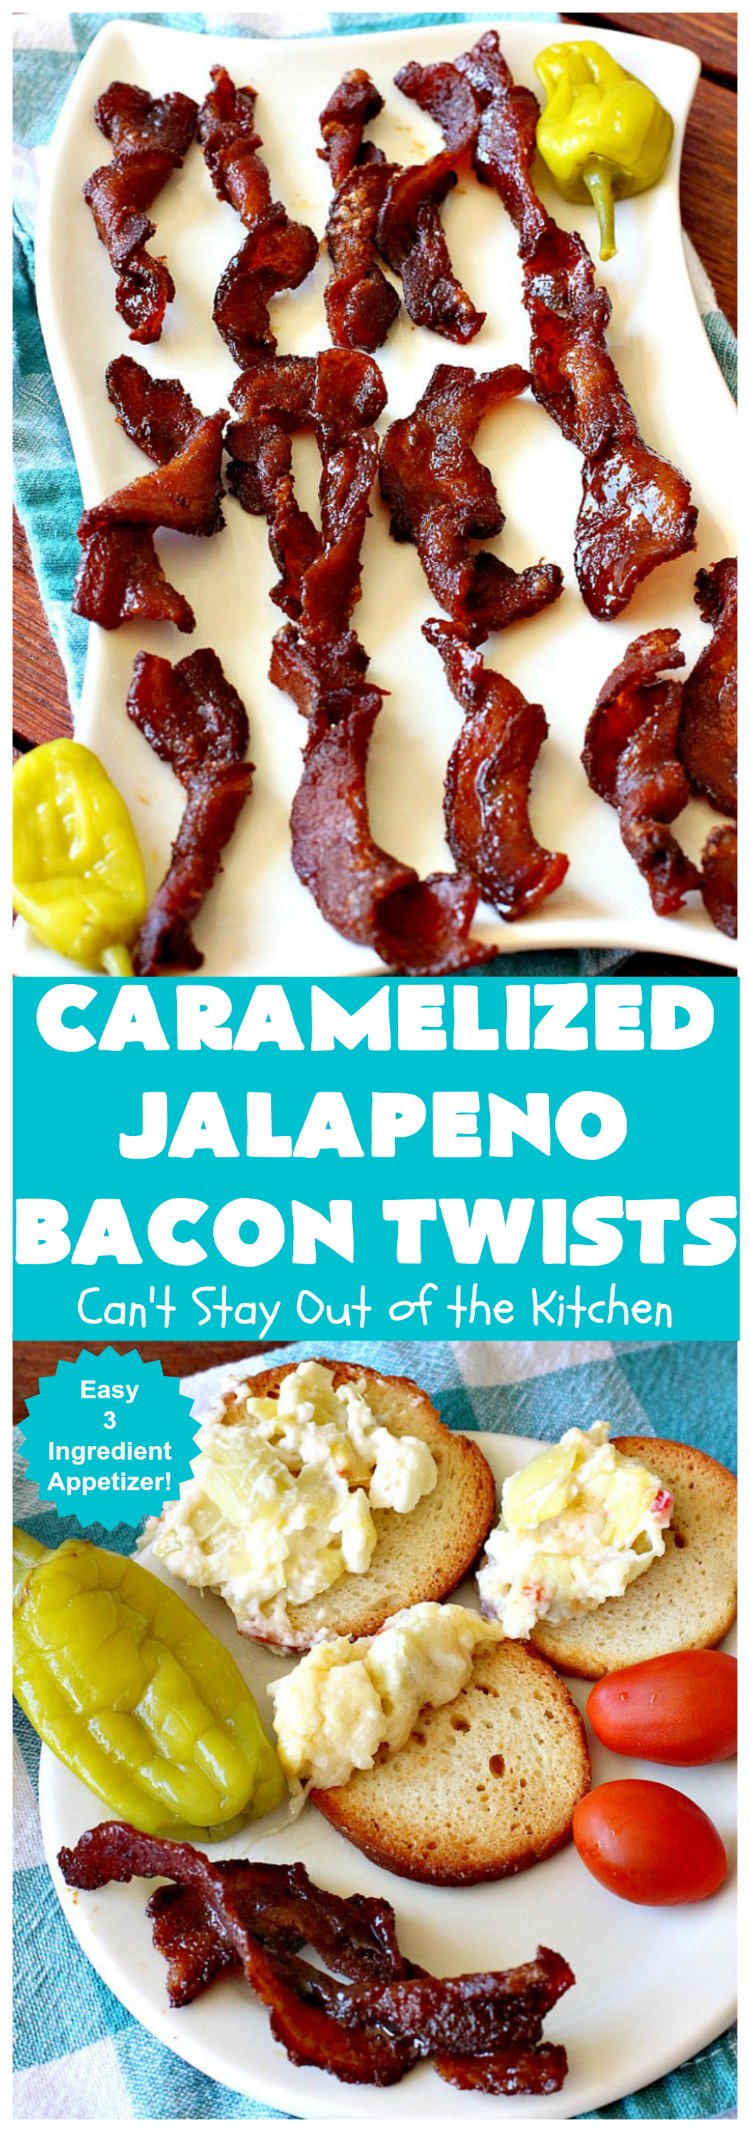 Caramelized Jalapeno Bacon Twists | Can't Stay Out of the Kitchen